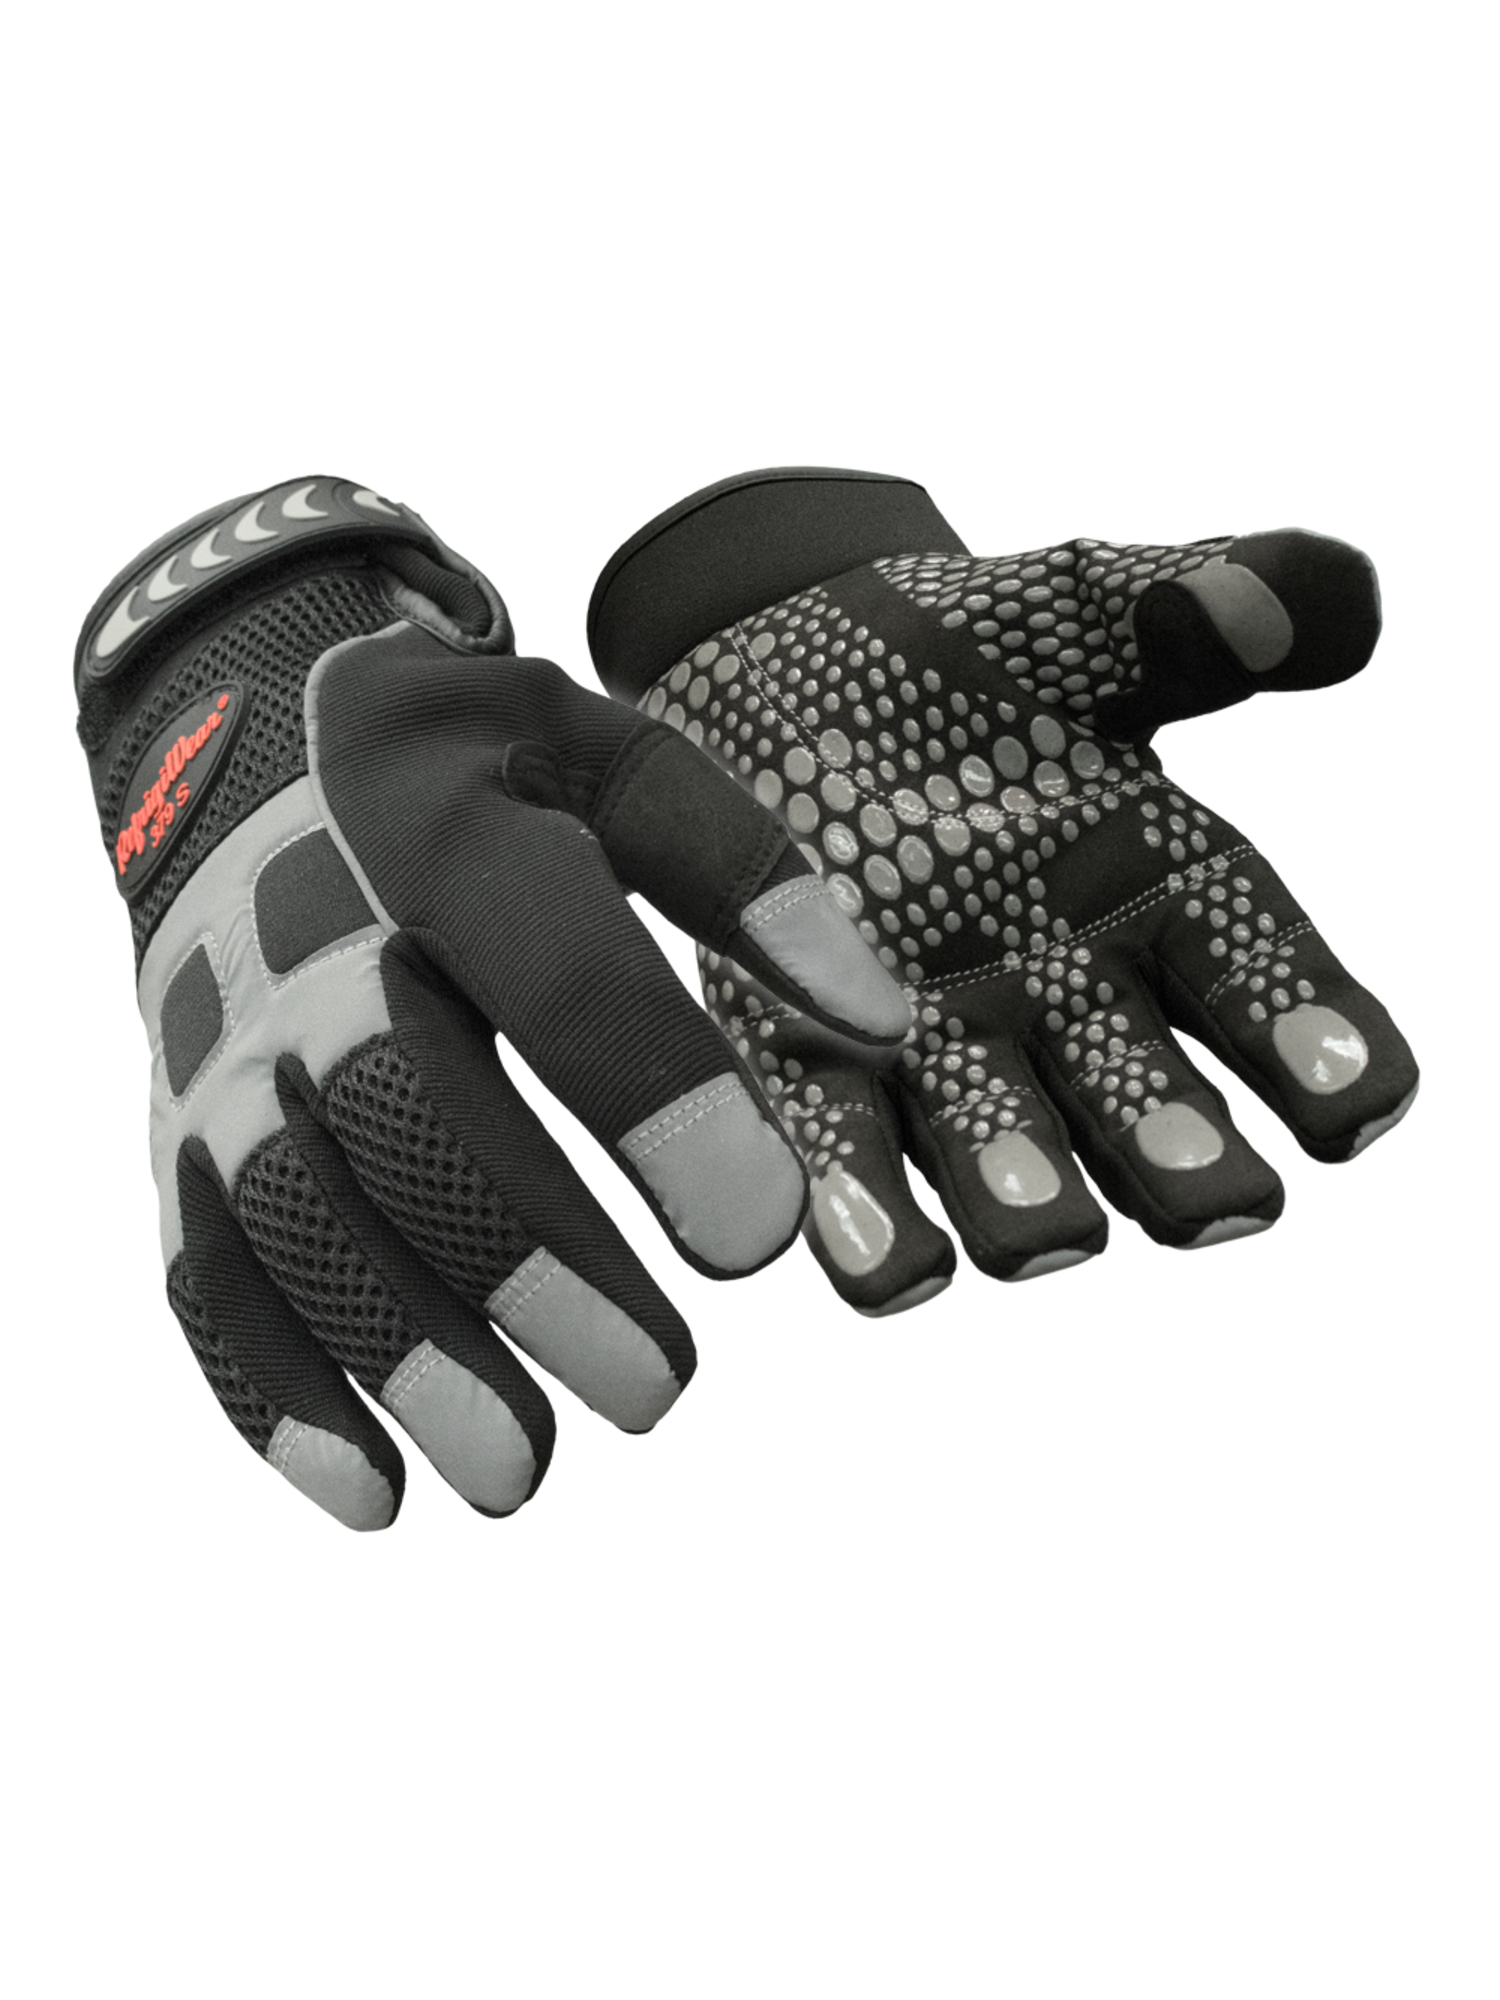 RefrigiWear Insulated HiVis Super Grip Glove | Black | Ragg Wool/Synthetic/Leather | L